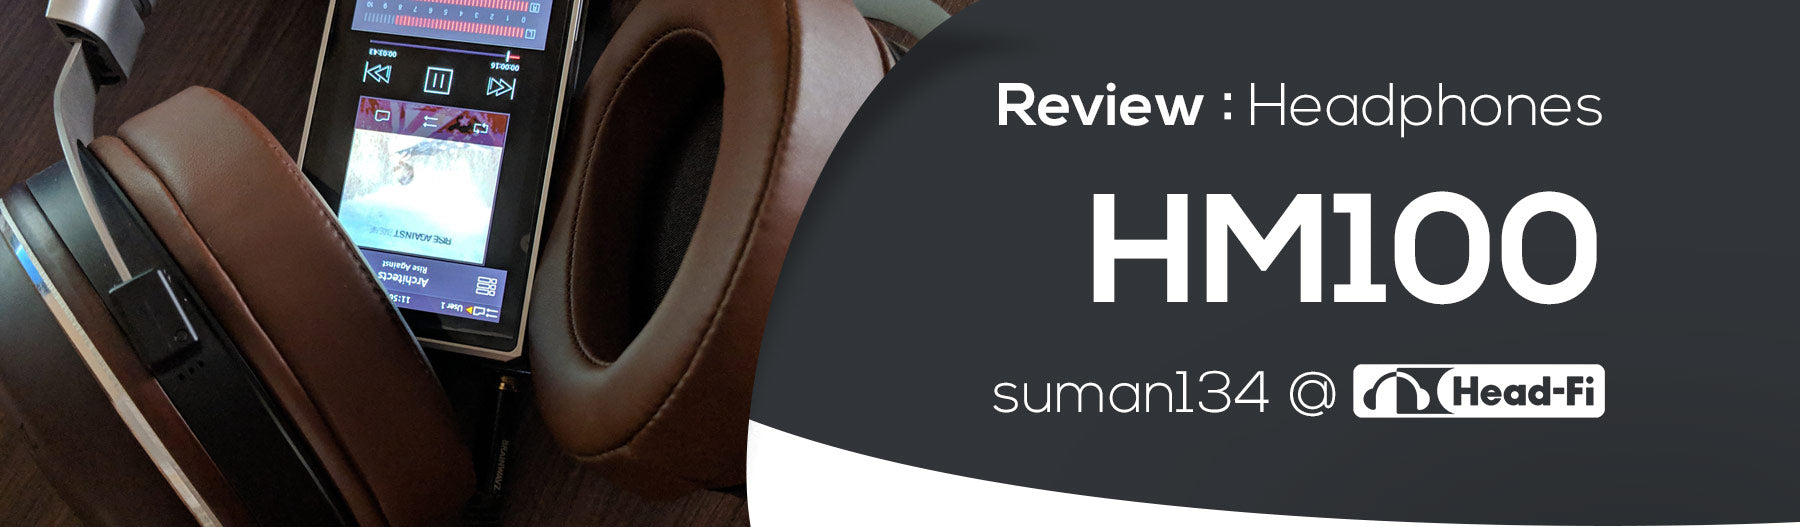 HM100  - Solid Review for our Wooden Headphones